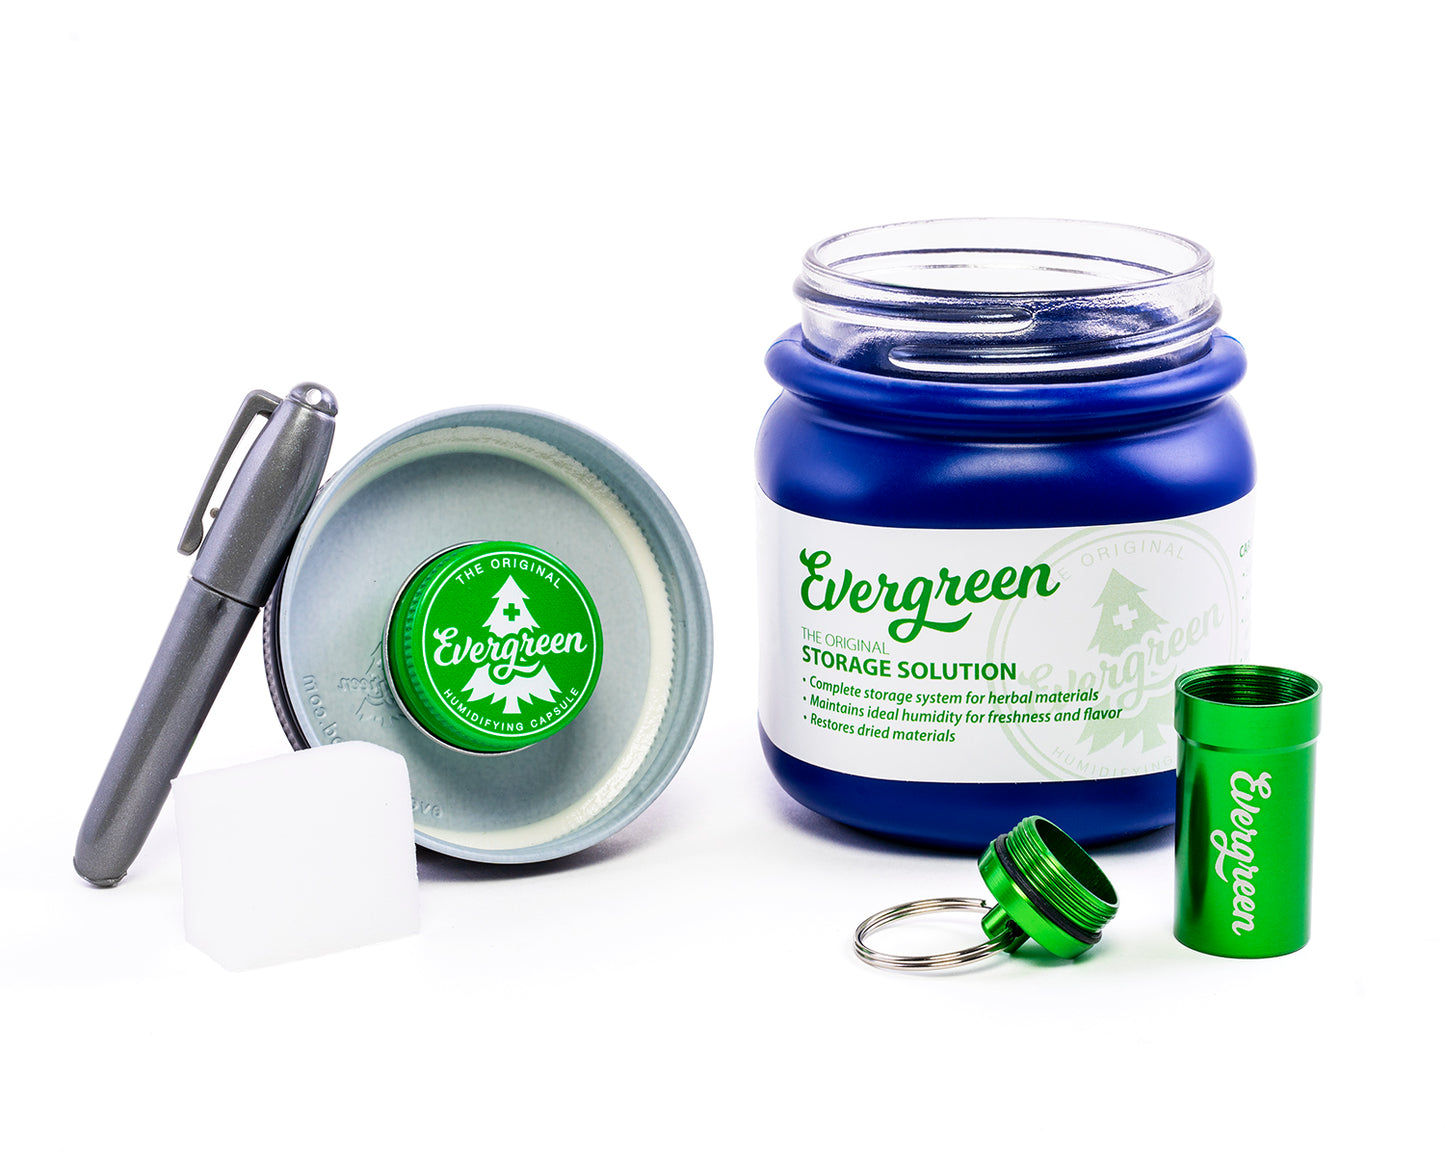 Evergreen Storage Solution open showing contents, cobalt blue